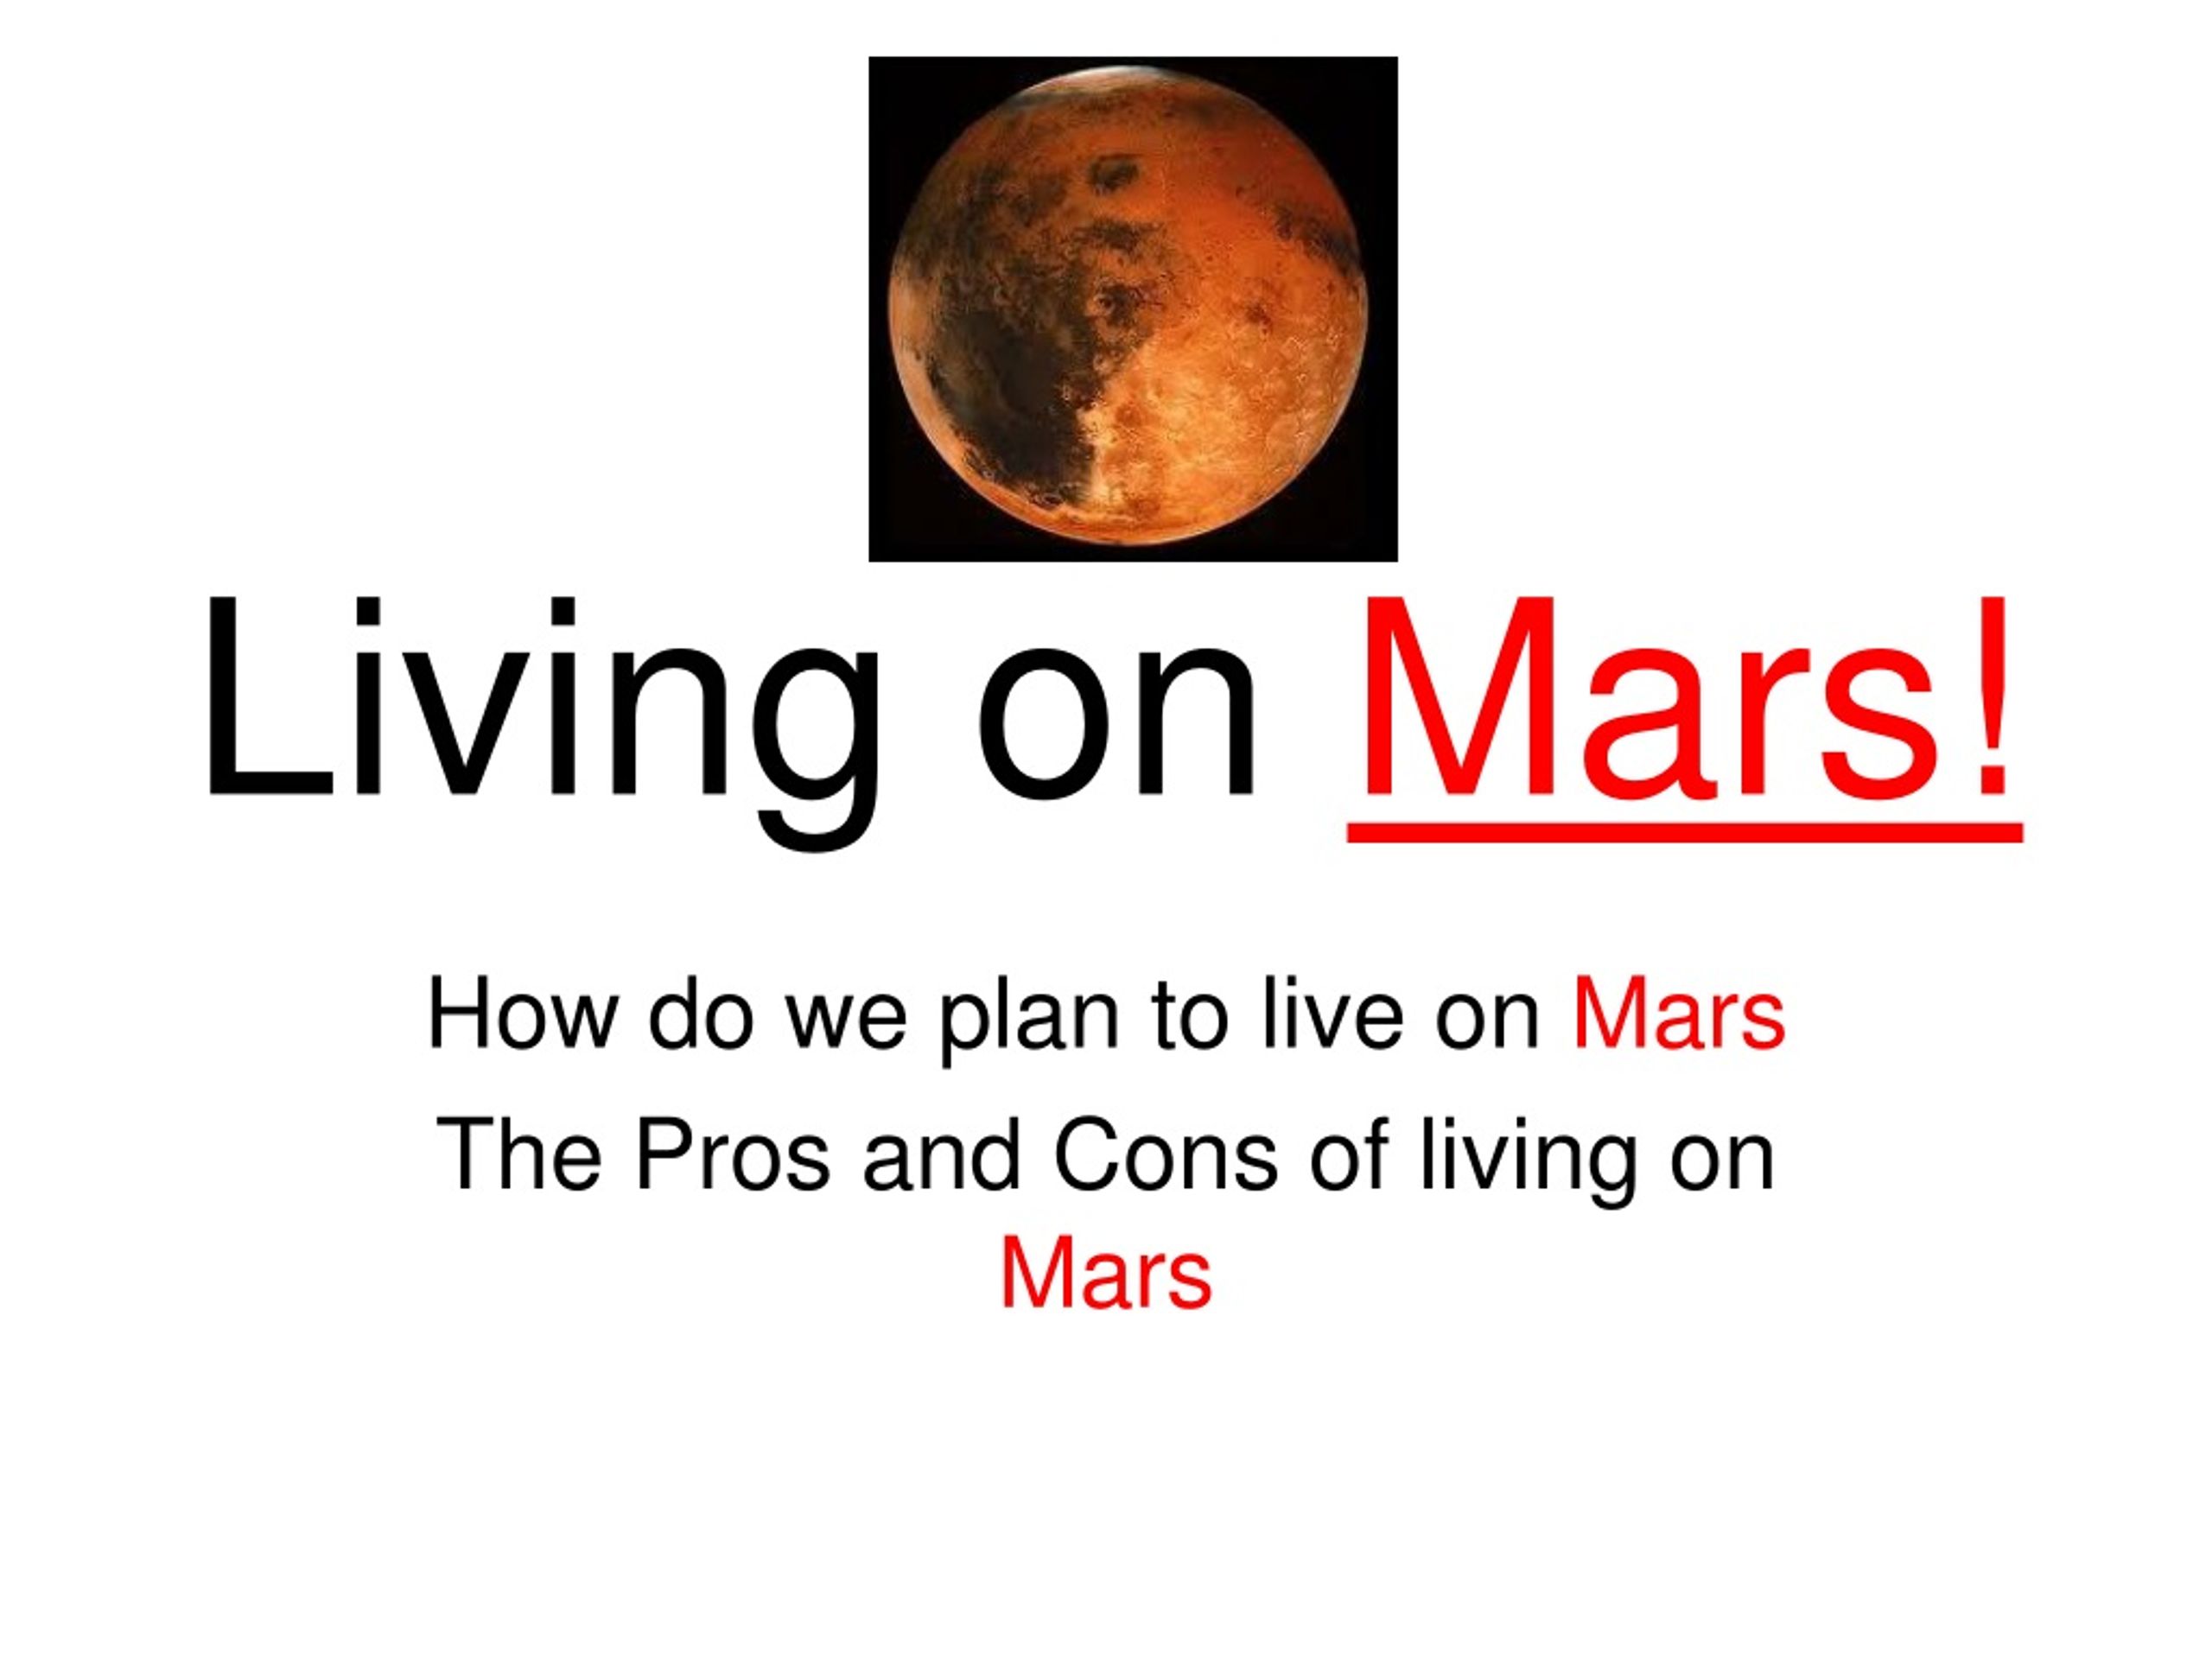 presentation about life on mars